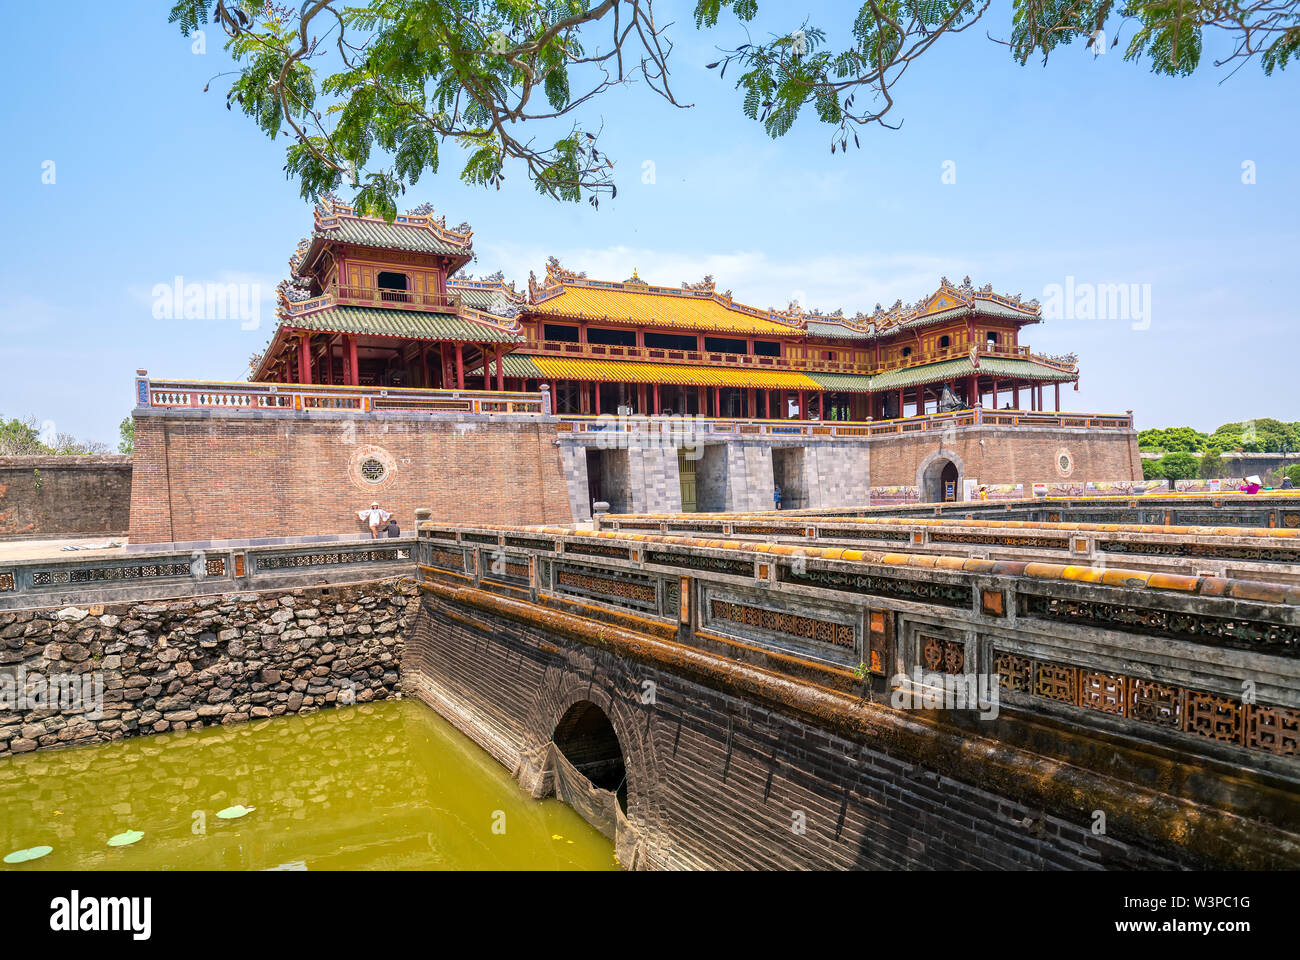 Dai Noi Palace Complex of Hue Monuments. The place that leads to the palaces of kings is the official in the 19th century in Hue, Vietnam Stock Photo